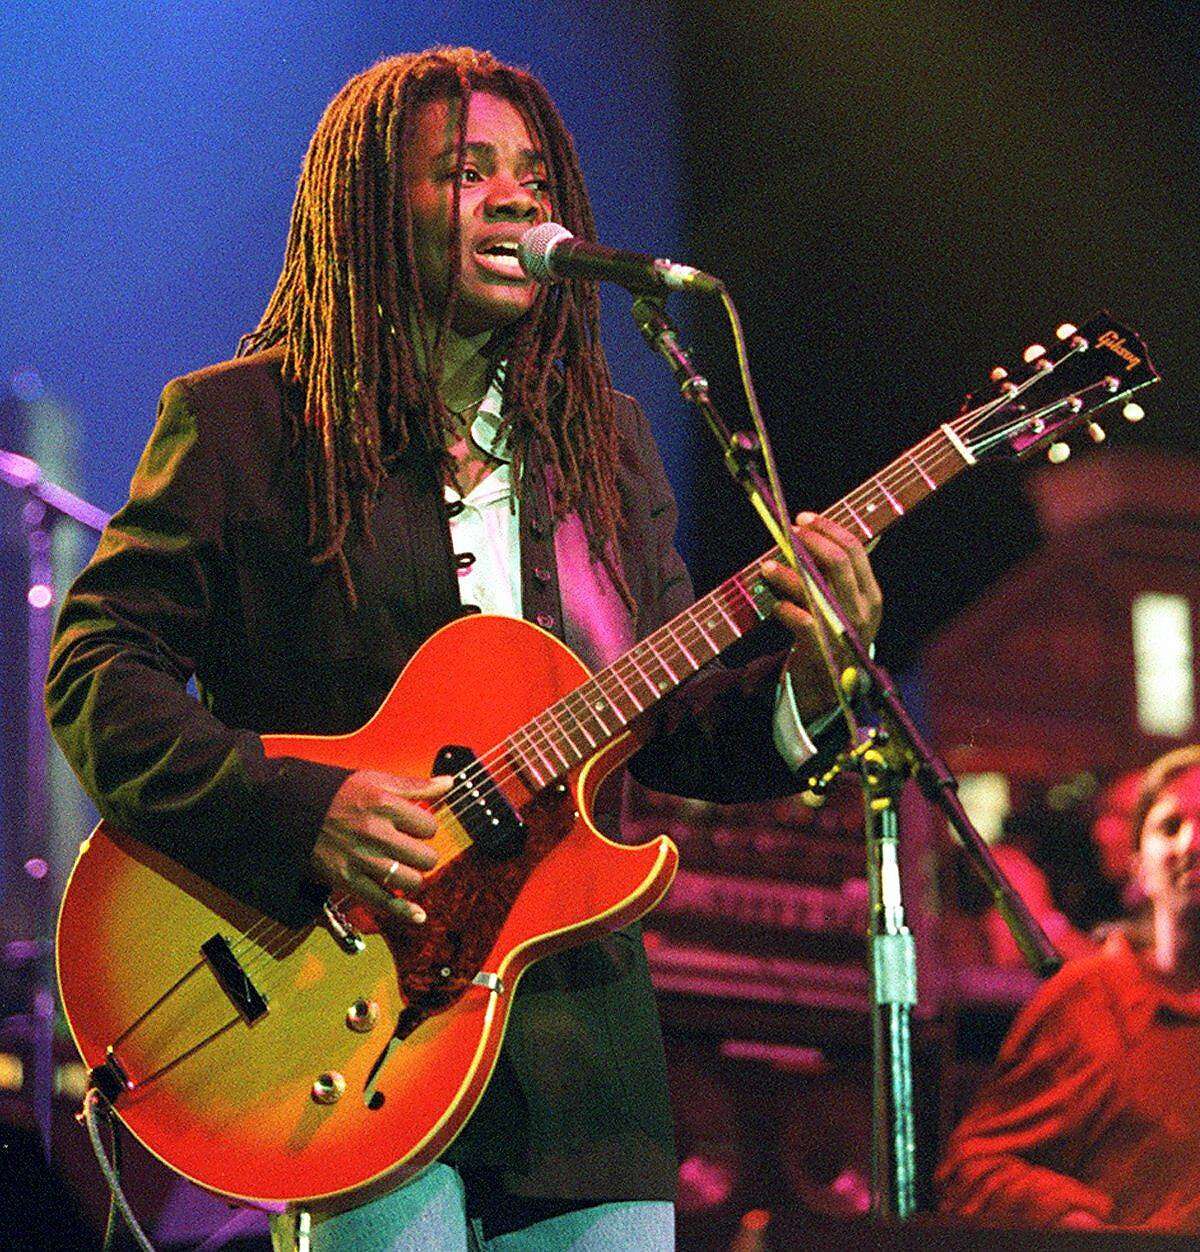 BAMMIES 2/C/15MAR97/DD/PDS---The big winner of the 1997 Bammies Tracy Chapman during her evenings performance. Chronicle Photo By: Peter DaSilva